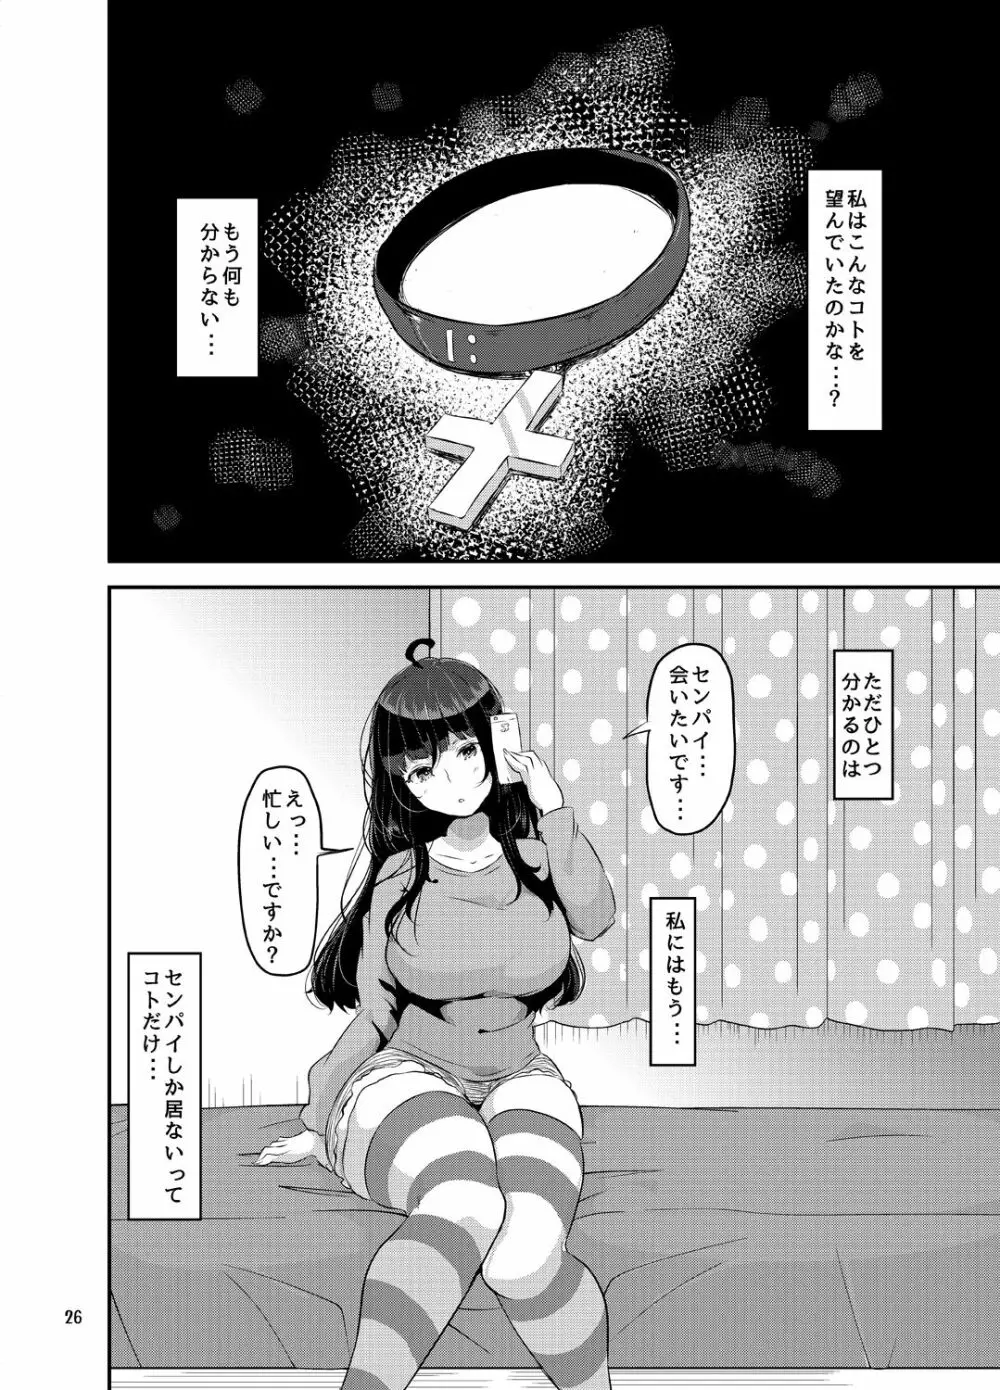 好き好き好き好き好き好き好き好き ver.4 - page27